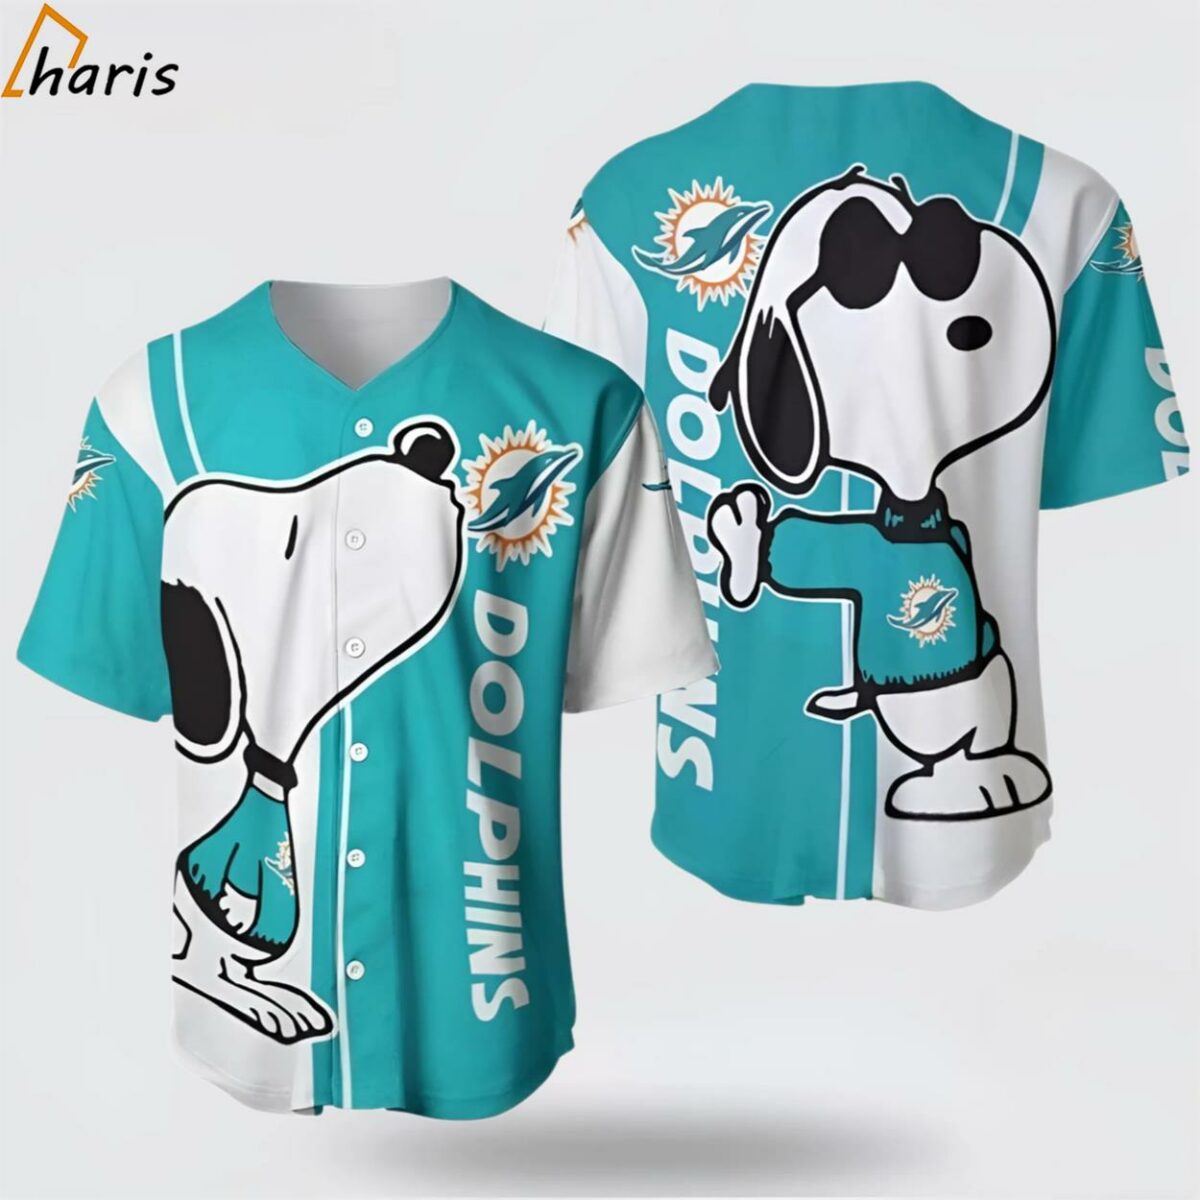 NFL Miami Dolphins Cool Snoopy Funny Baseball Jersey 1 jersey